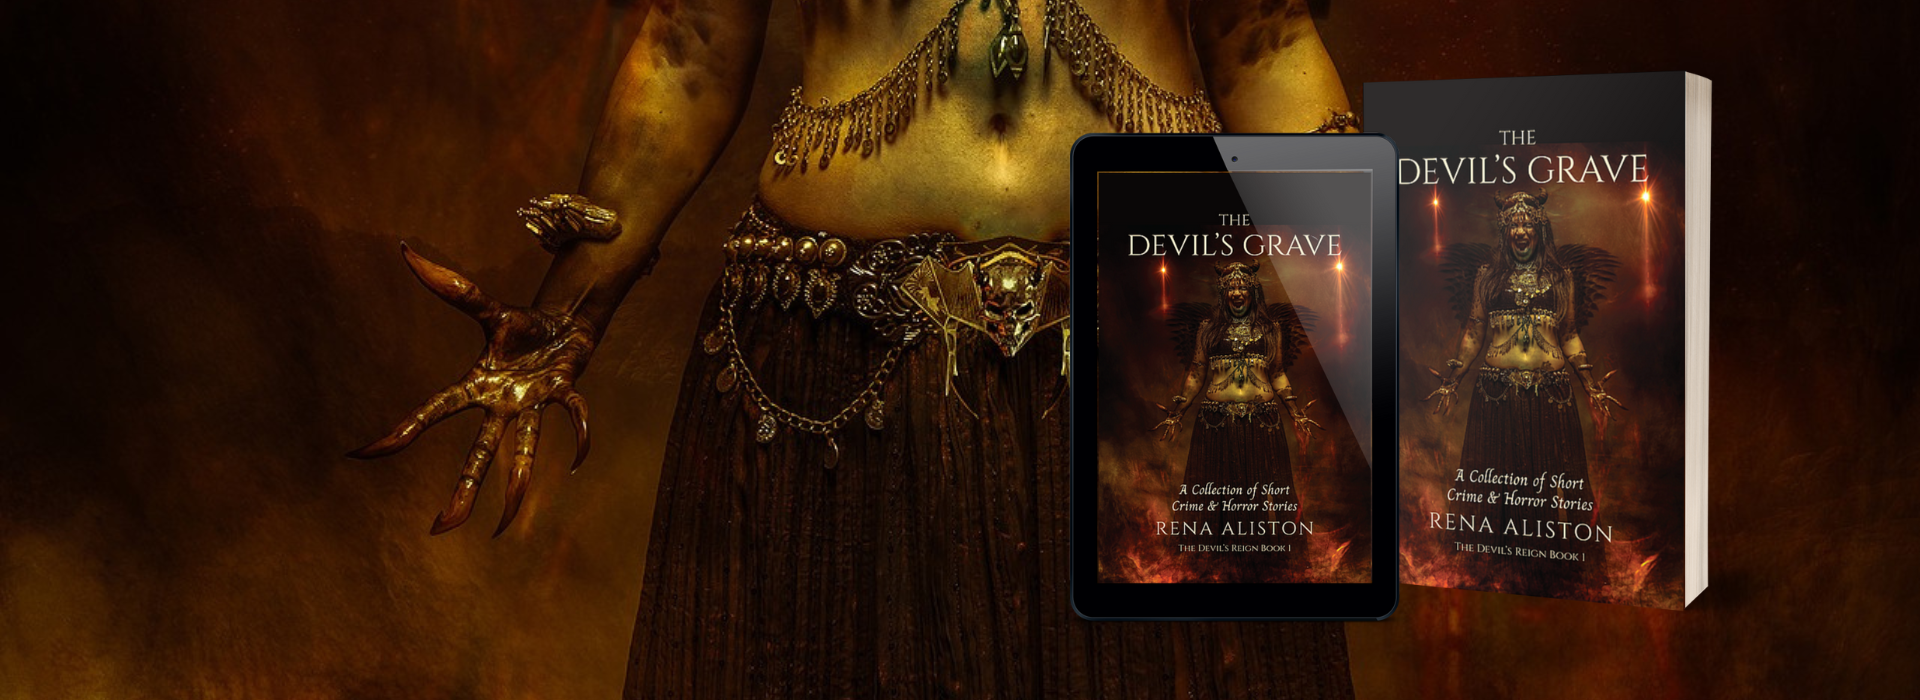 The Devil's Grave: A Collection of Short Crime & Horror Stories by Rena Aliston